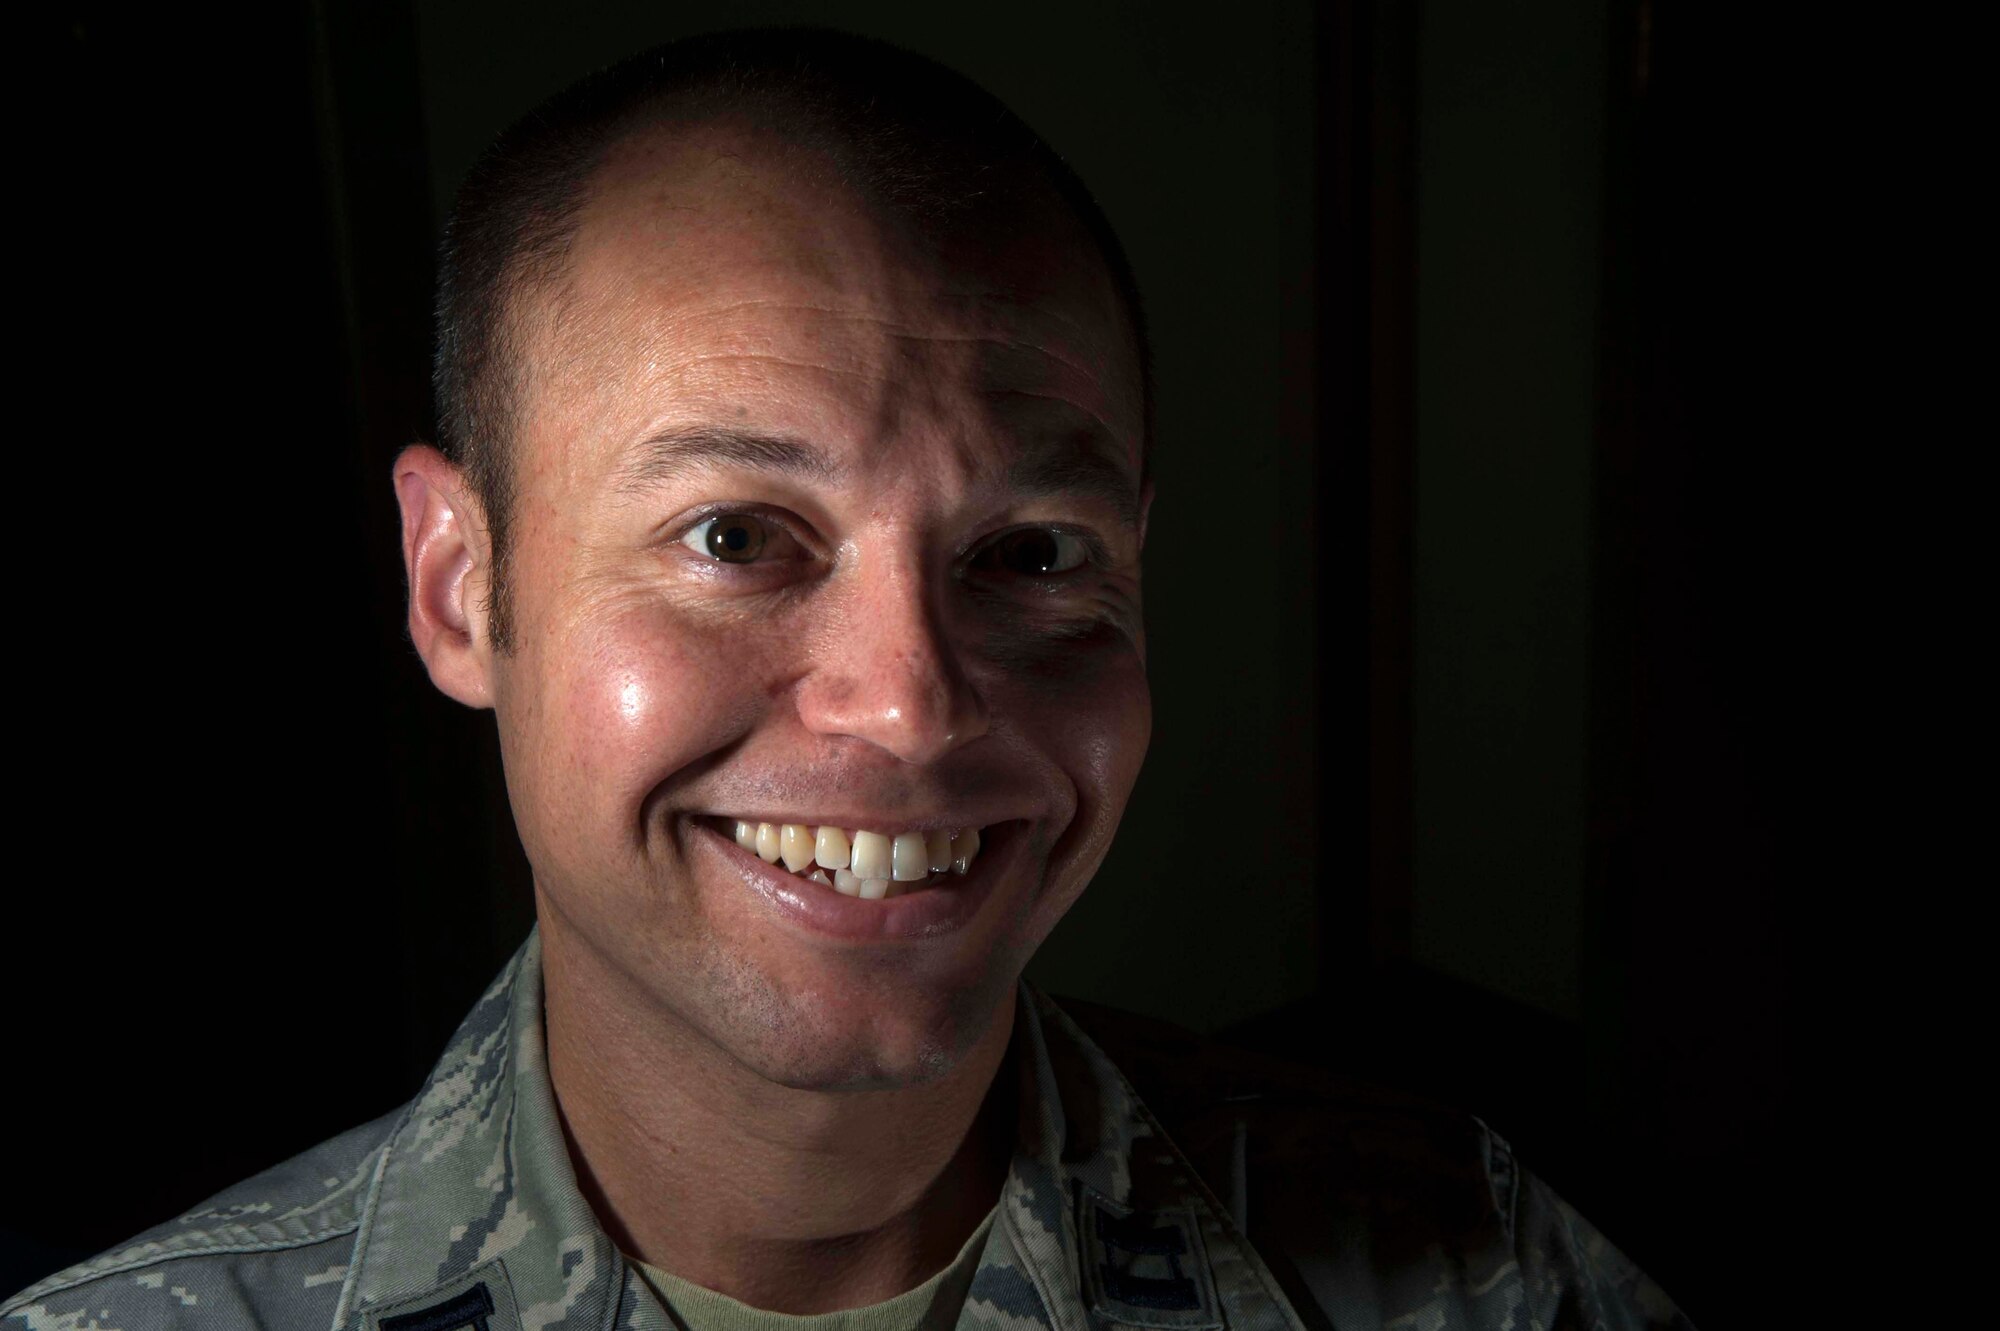 Capt. James Scott, Holm Center Curriculum Directorate Field Leadership chief, poses for a portrait Dec. 3, 2015 at Maxwell Air Force Base, Ala. Scott is scheduled to debut in his first performance as Keith Hartley in the Christmas comedy “Merry Christmas, Dear Grandpa.” (U.S. Air Force photo by Airman 1st Class Alexa Culbert)